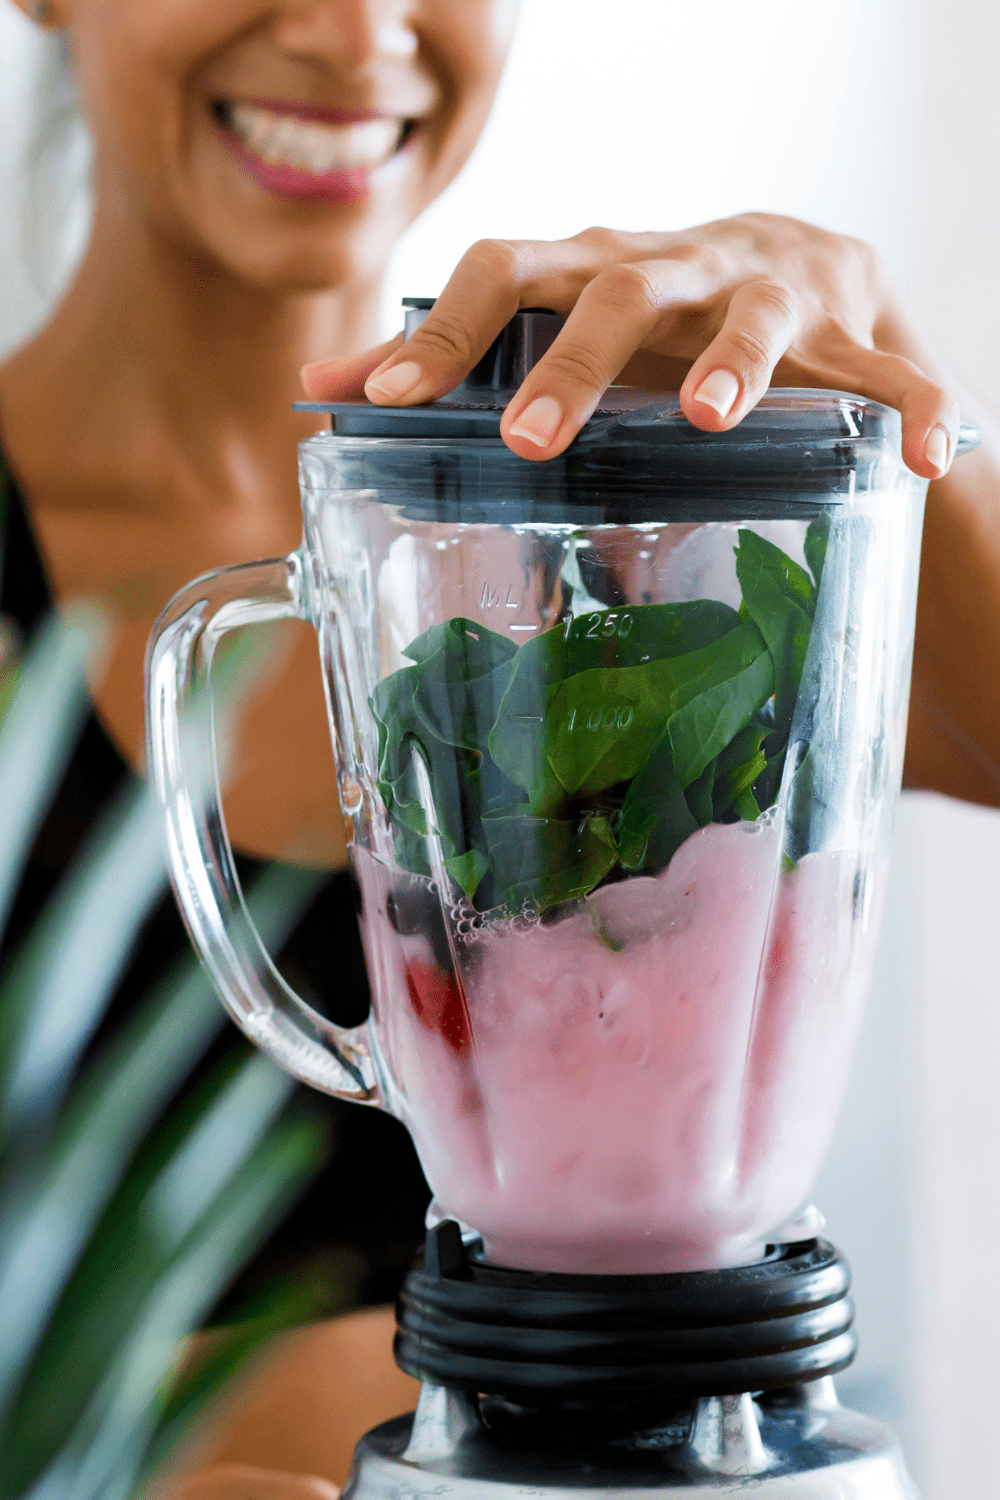 Close up of a blender with smoothie contents inside with a women smiling and holding the blender in the background.